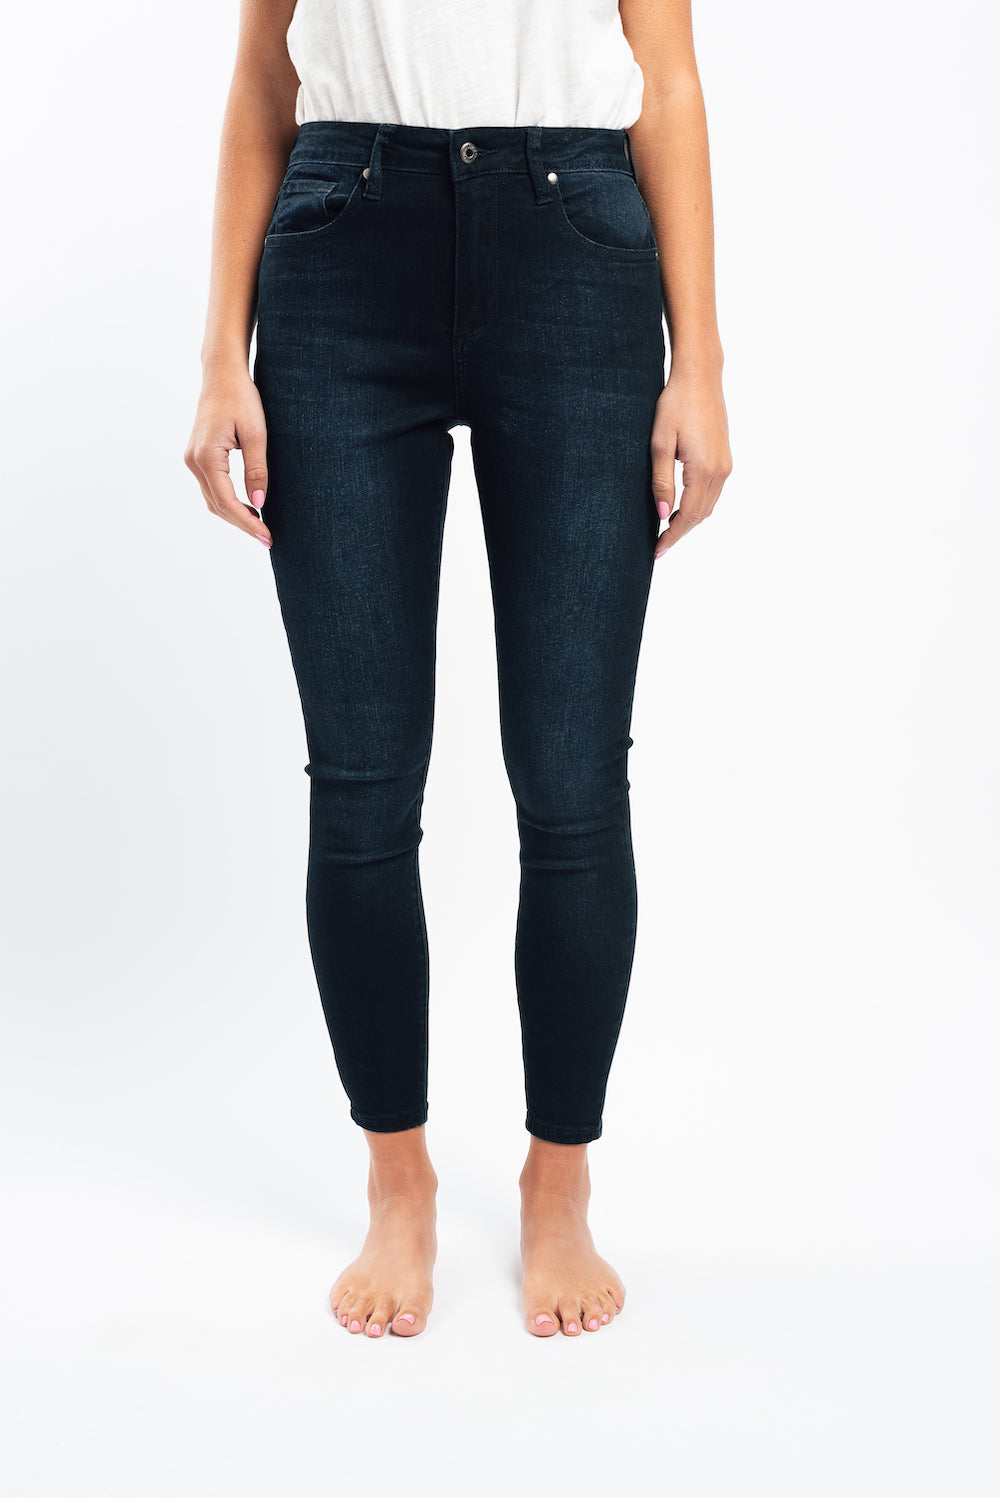 Alfie High Rise Skinny Jean - Washed Navy